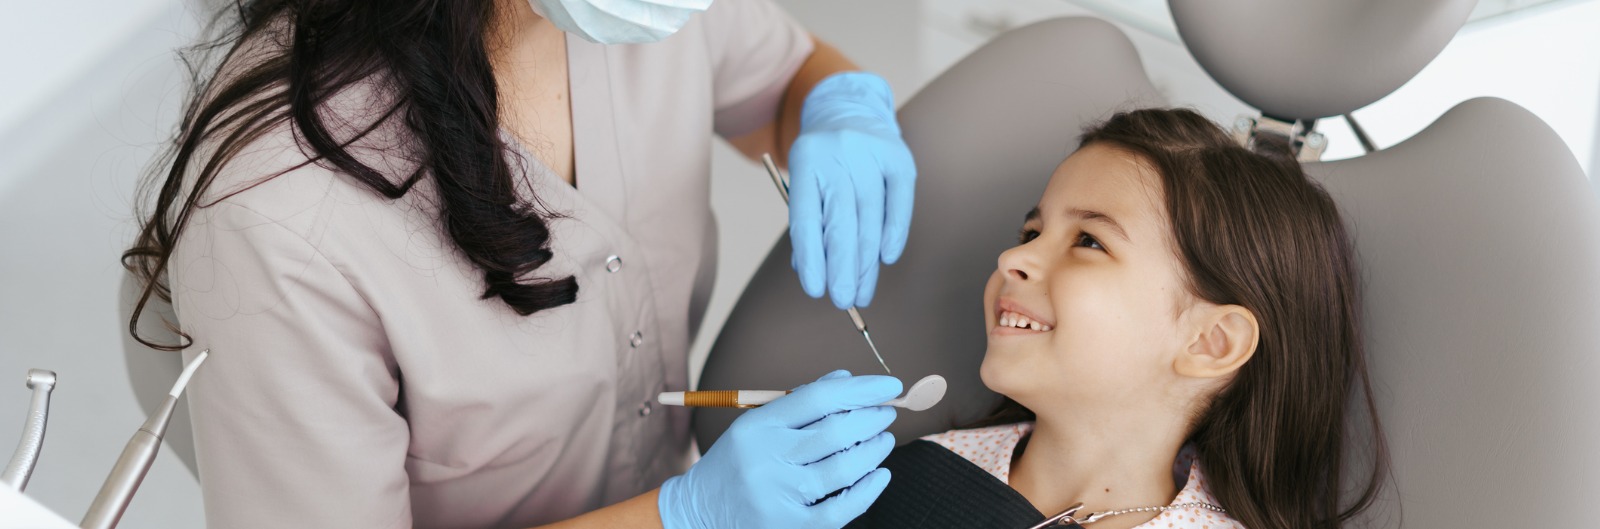 little-beautiful-girl-at-the-dentist-smiling-picture-1600x529.jpg